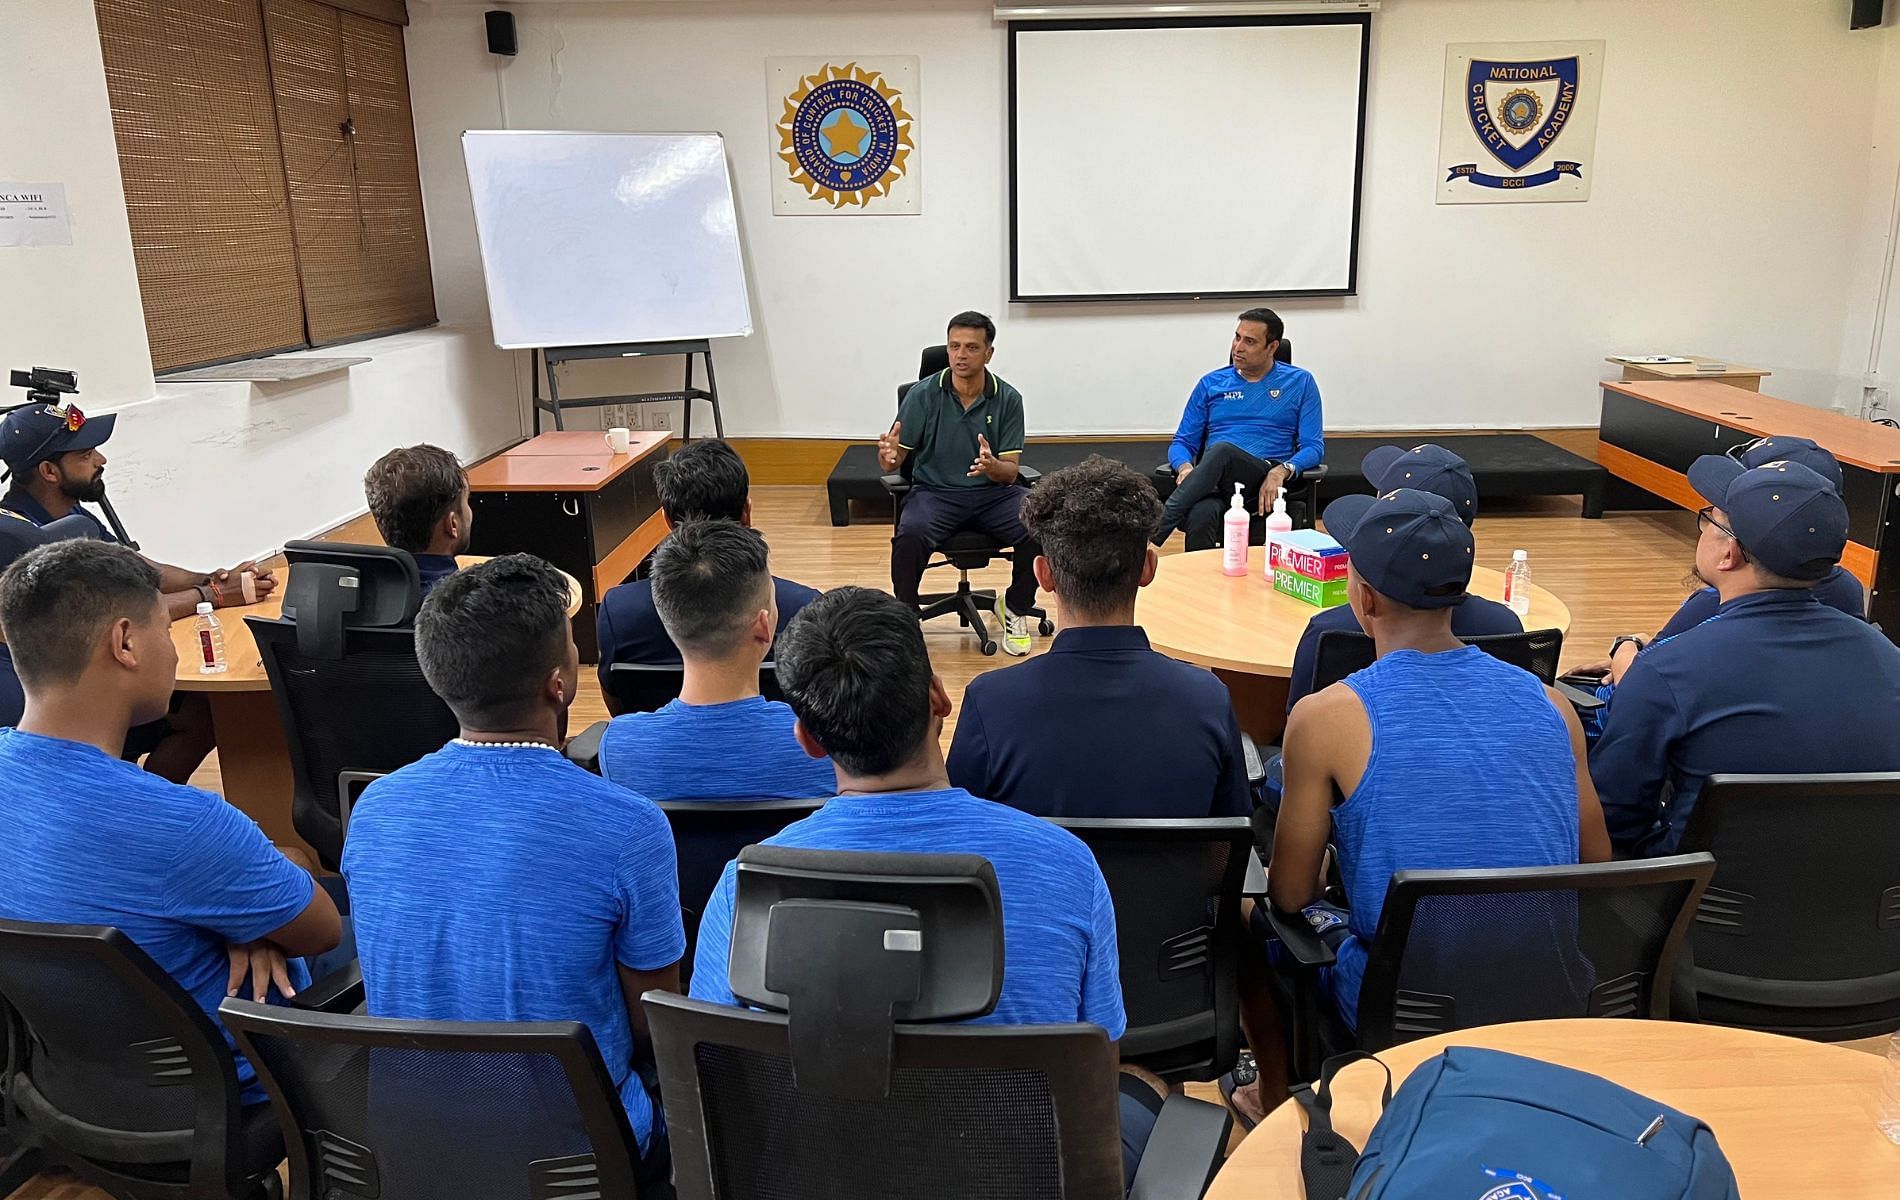 Rahul Dravid visited the NCA on Friday (Image: BCCI/Twitter)